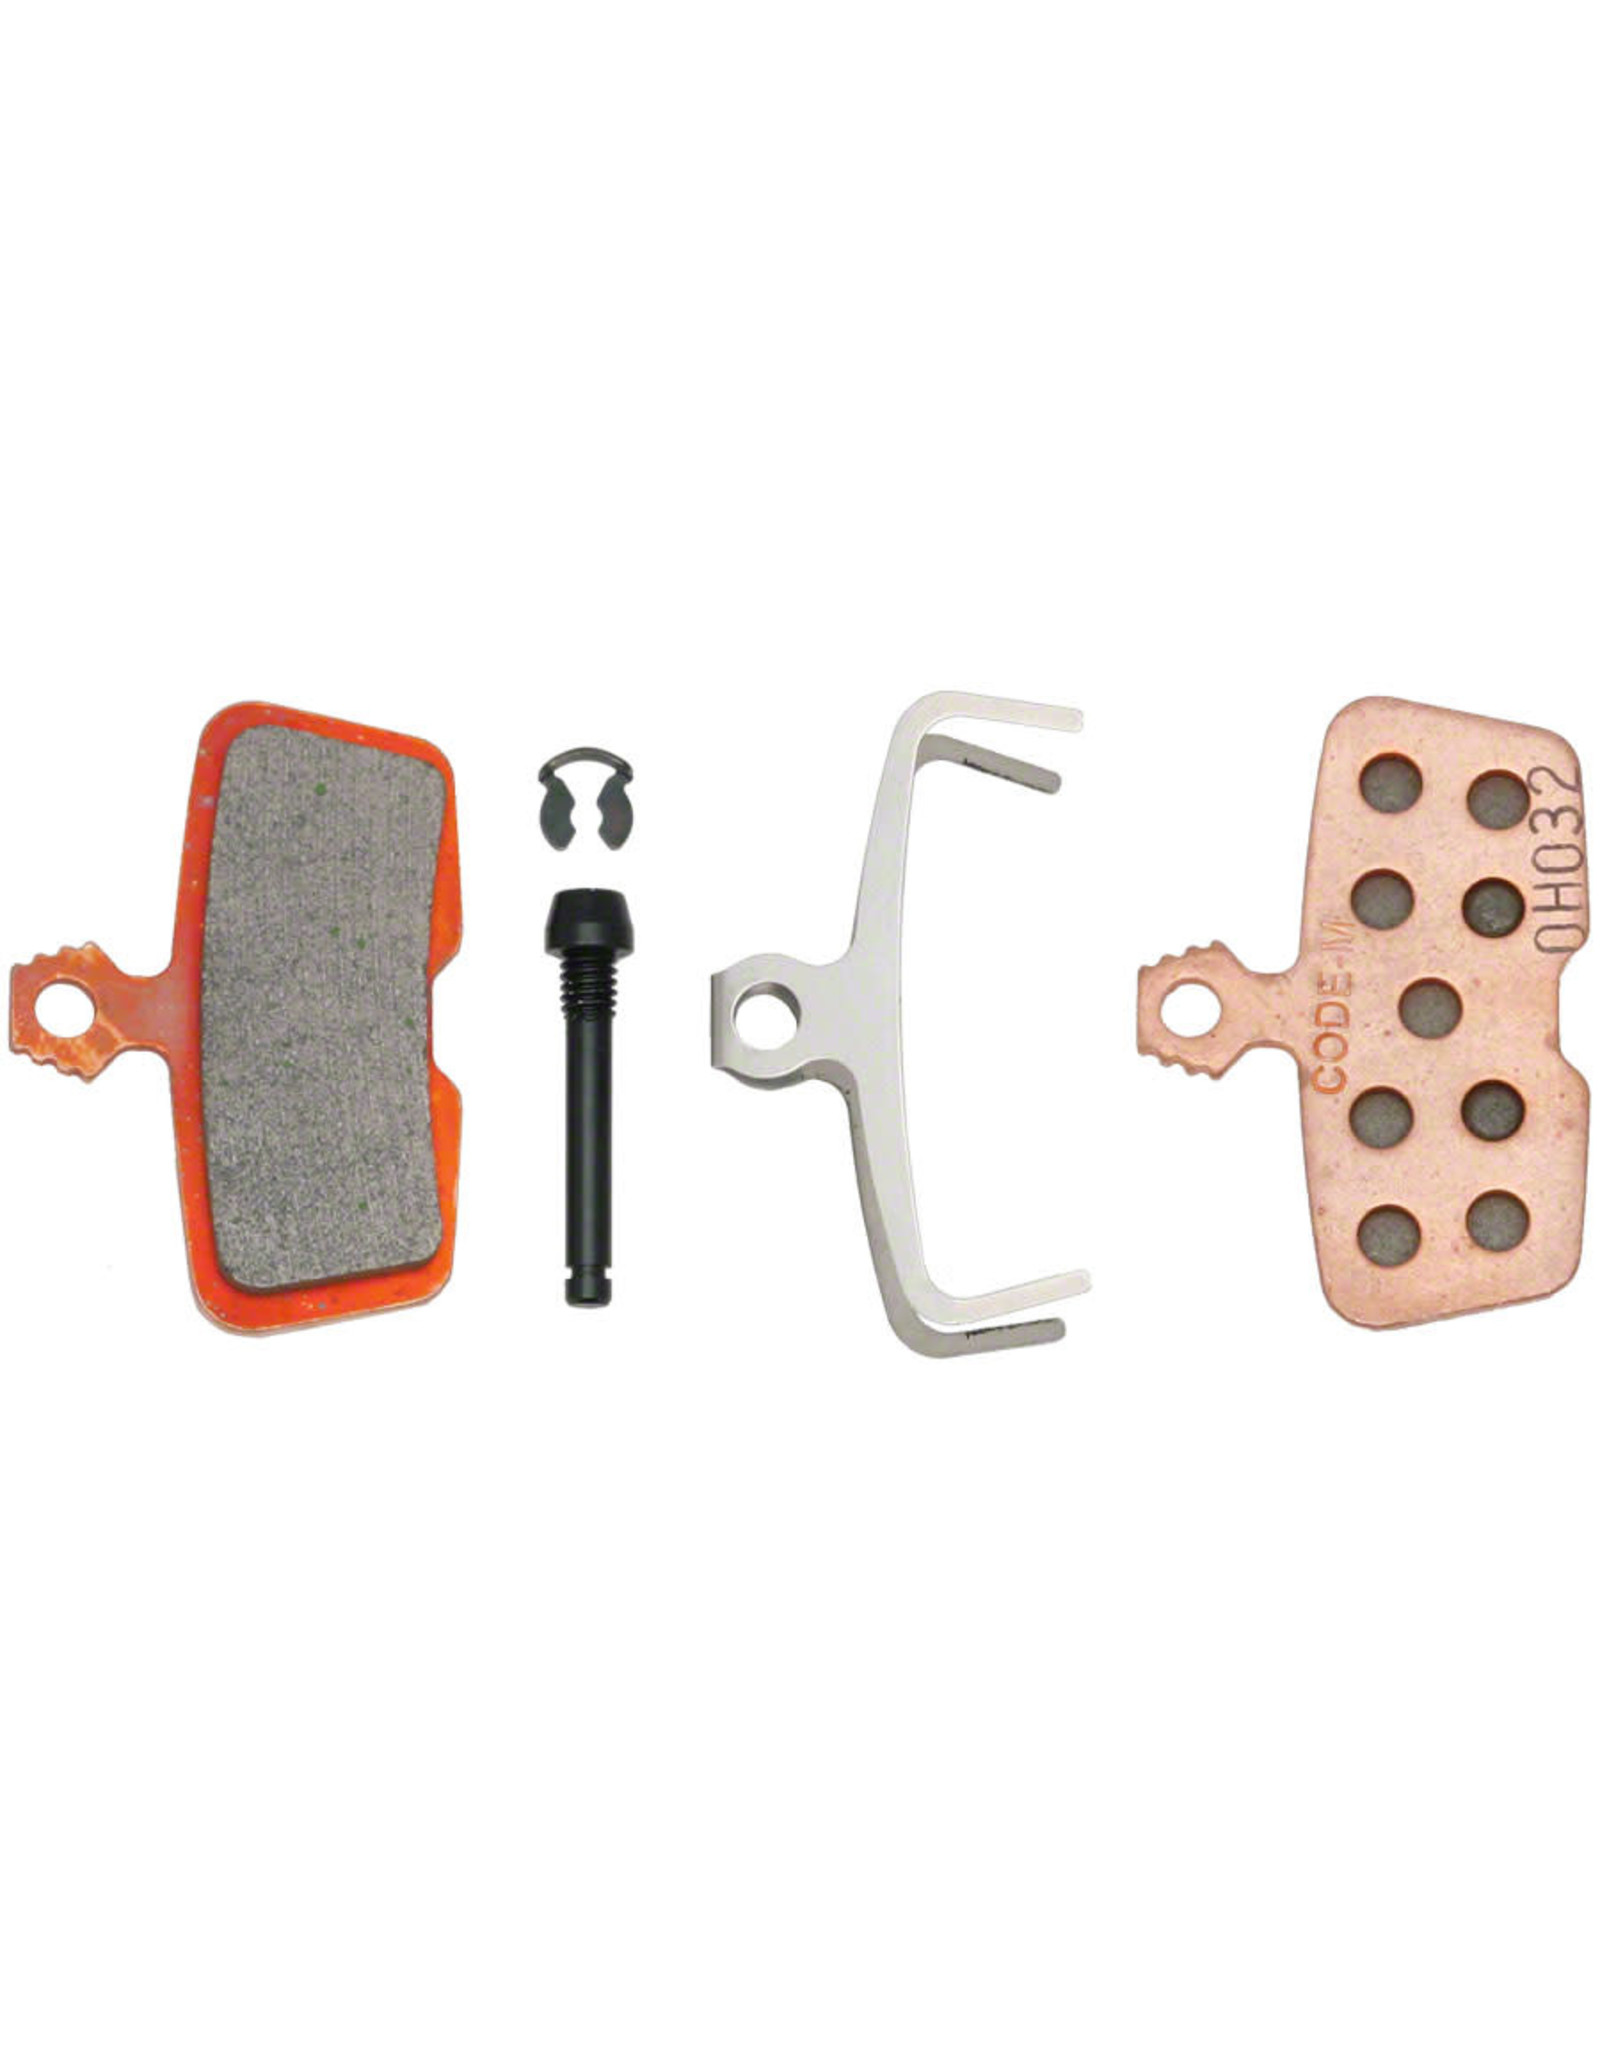 SRAM C: SRAM Disc Brake Pads - Sintered Compound, Steel Backed, Powerful, For Code 2011+ and Guide RE